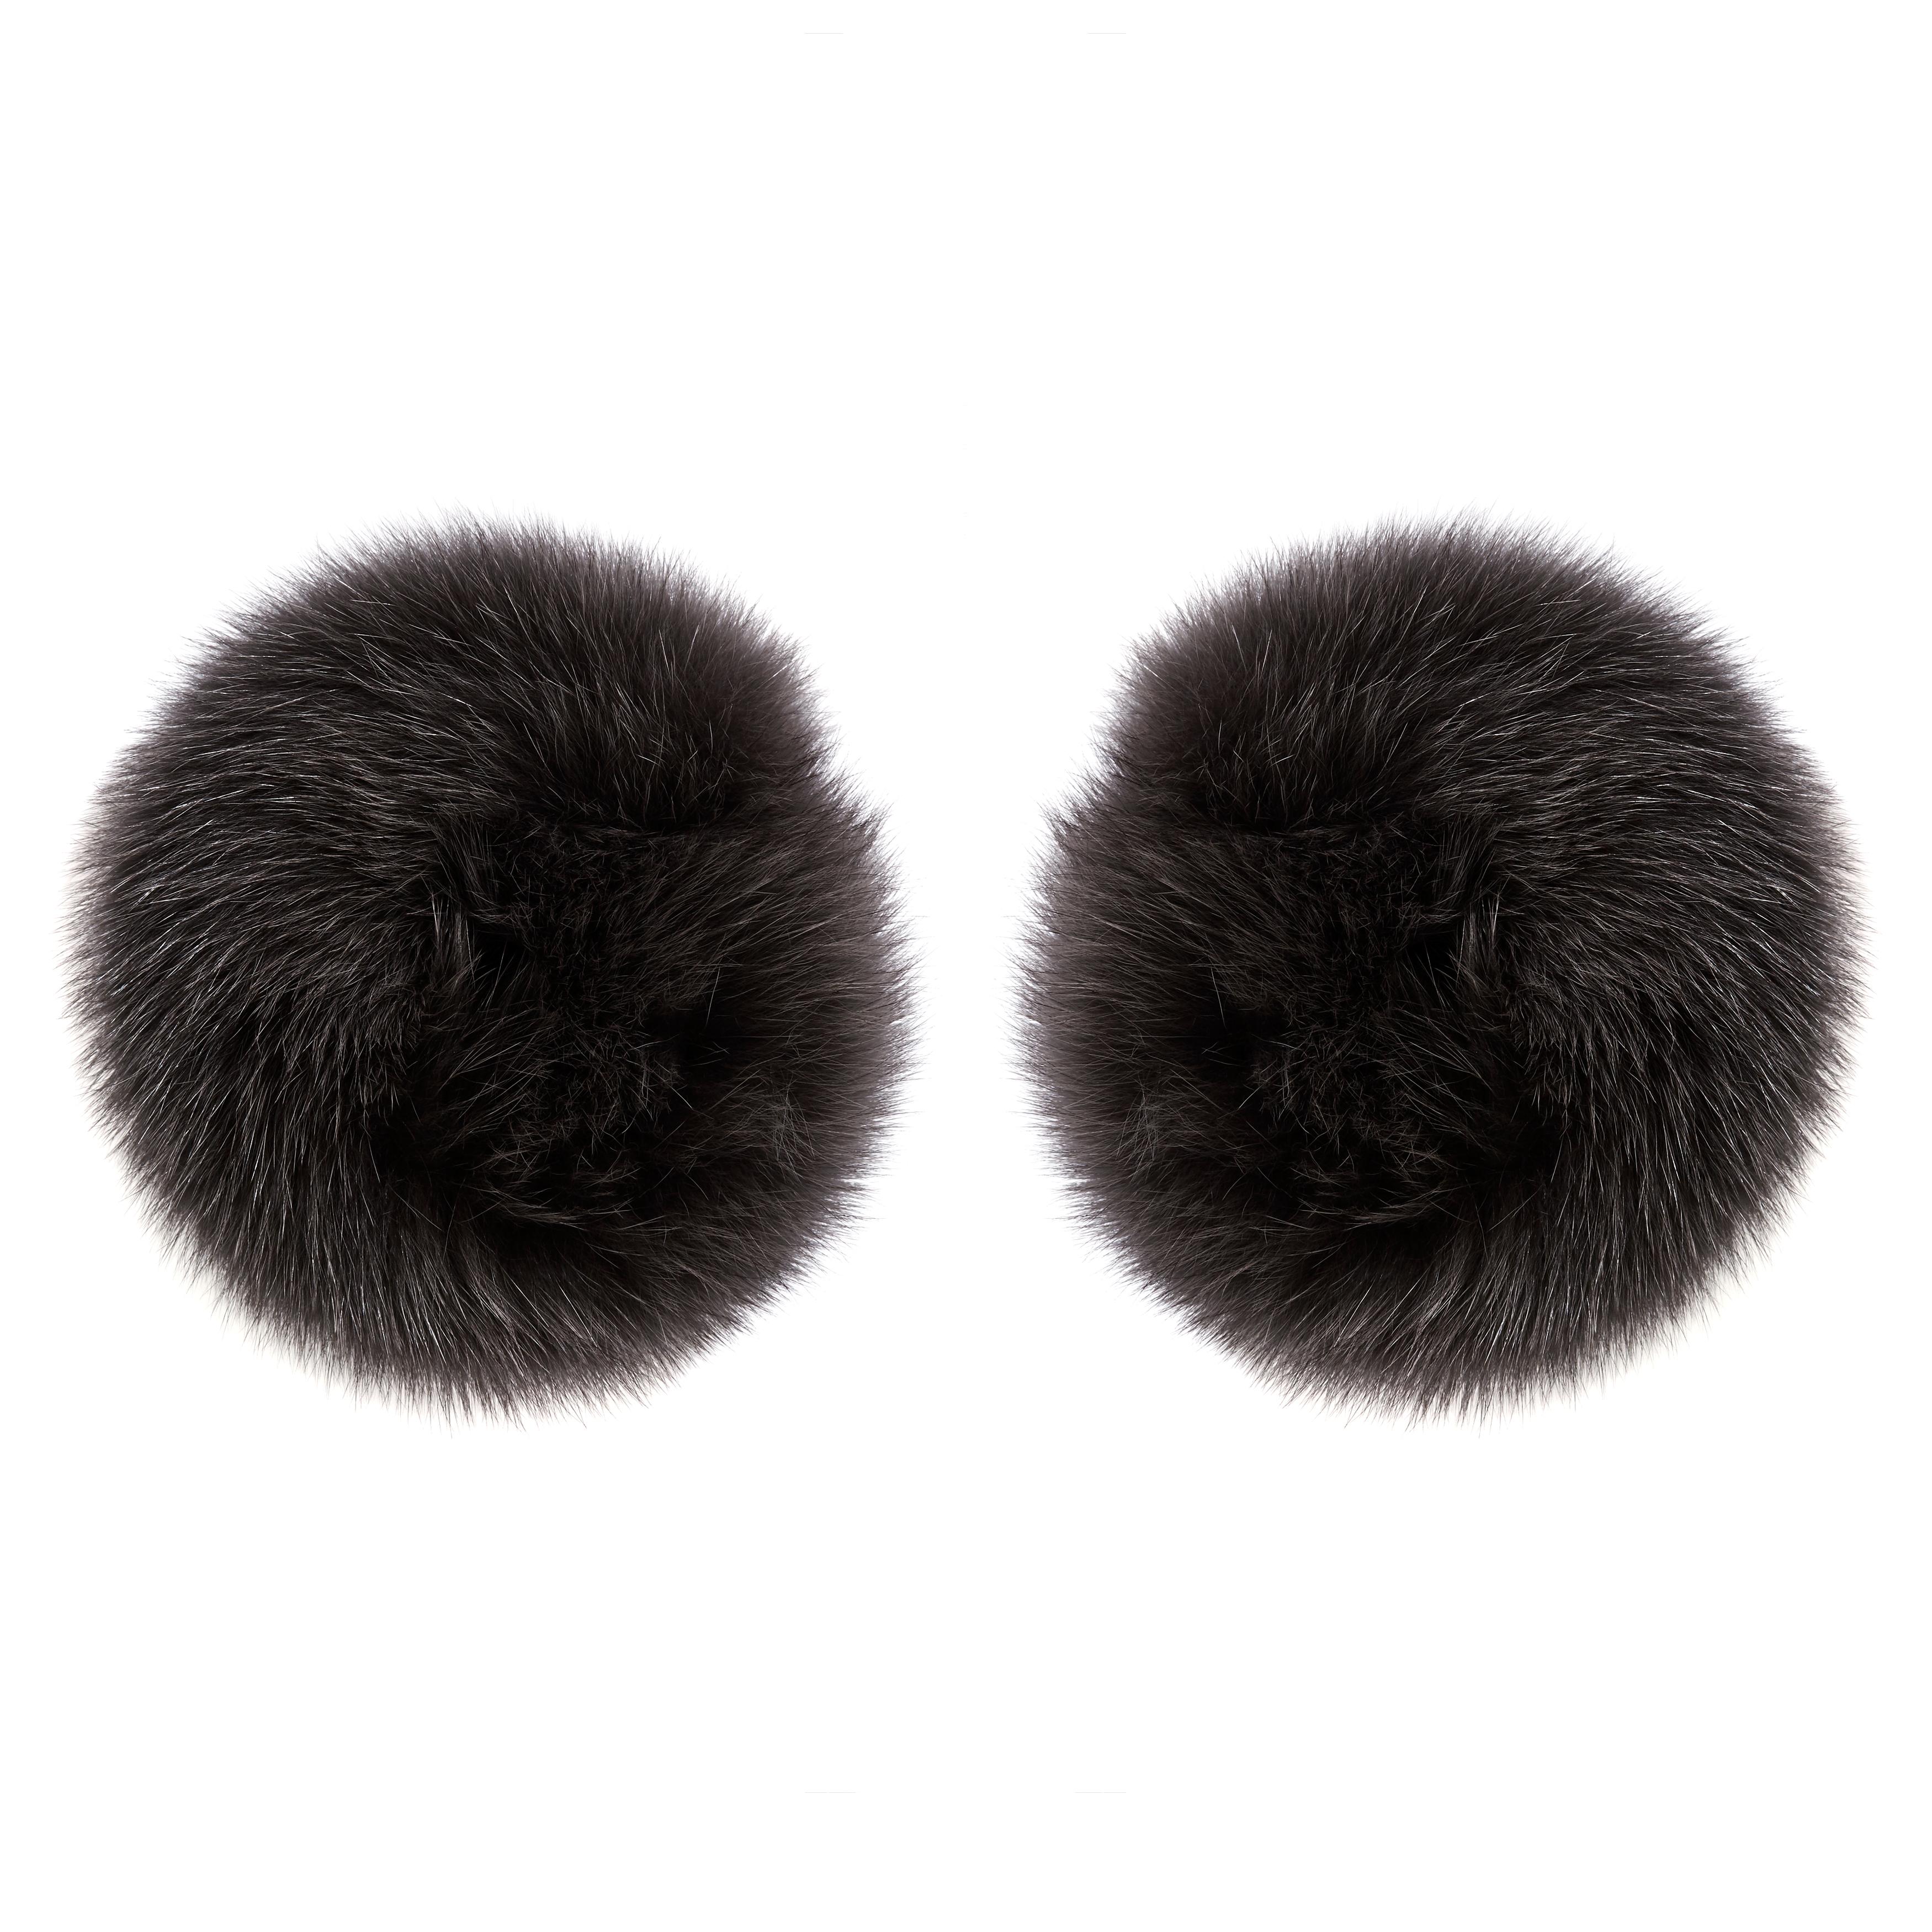 Verheyen London Snap on Fox Cuffs are the perfect accessory for winter/autumn dressing. Wear over any jumper or coat, these cuffs will jazz up any look and keep you staying cosy with style. 

Size - Double 

All fur is origin assured and ethically